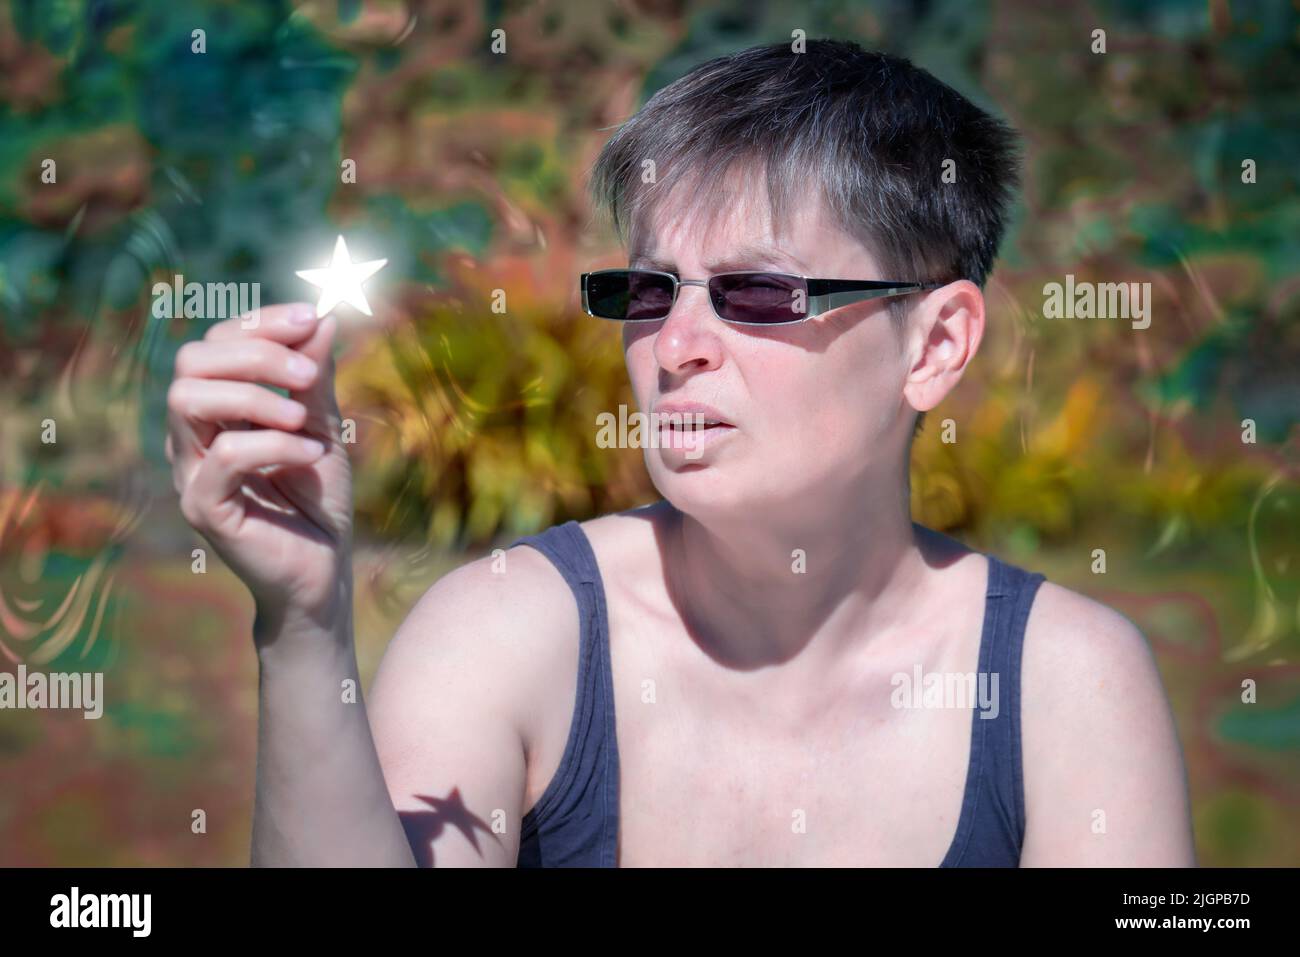 Woman sitting outdoor and holding shining star in her hands. Stock Photo